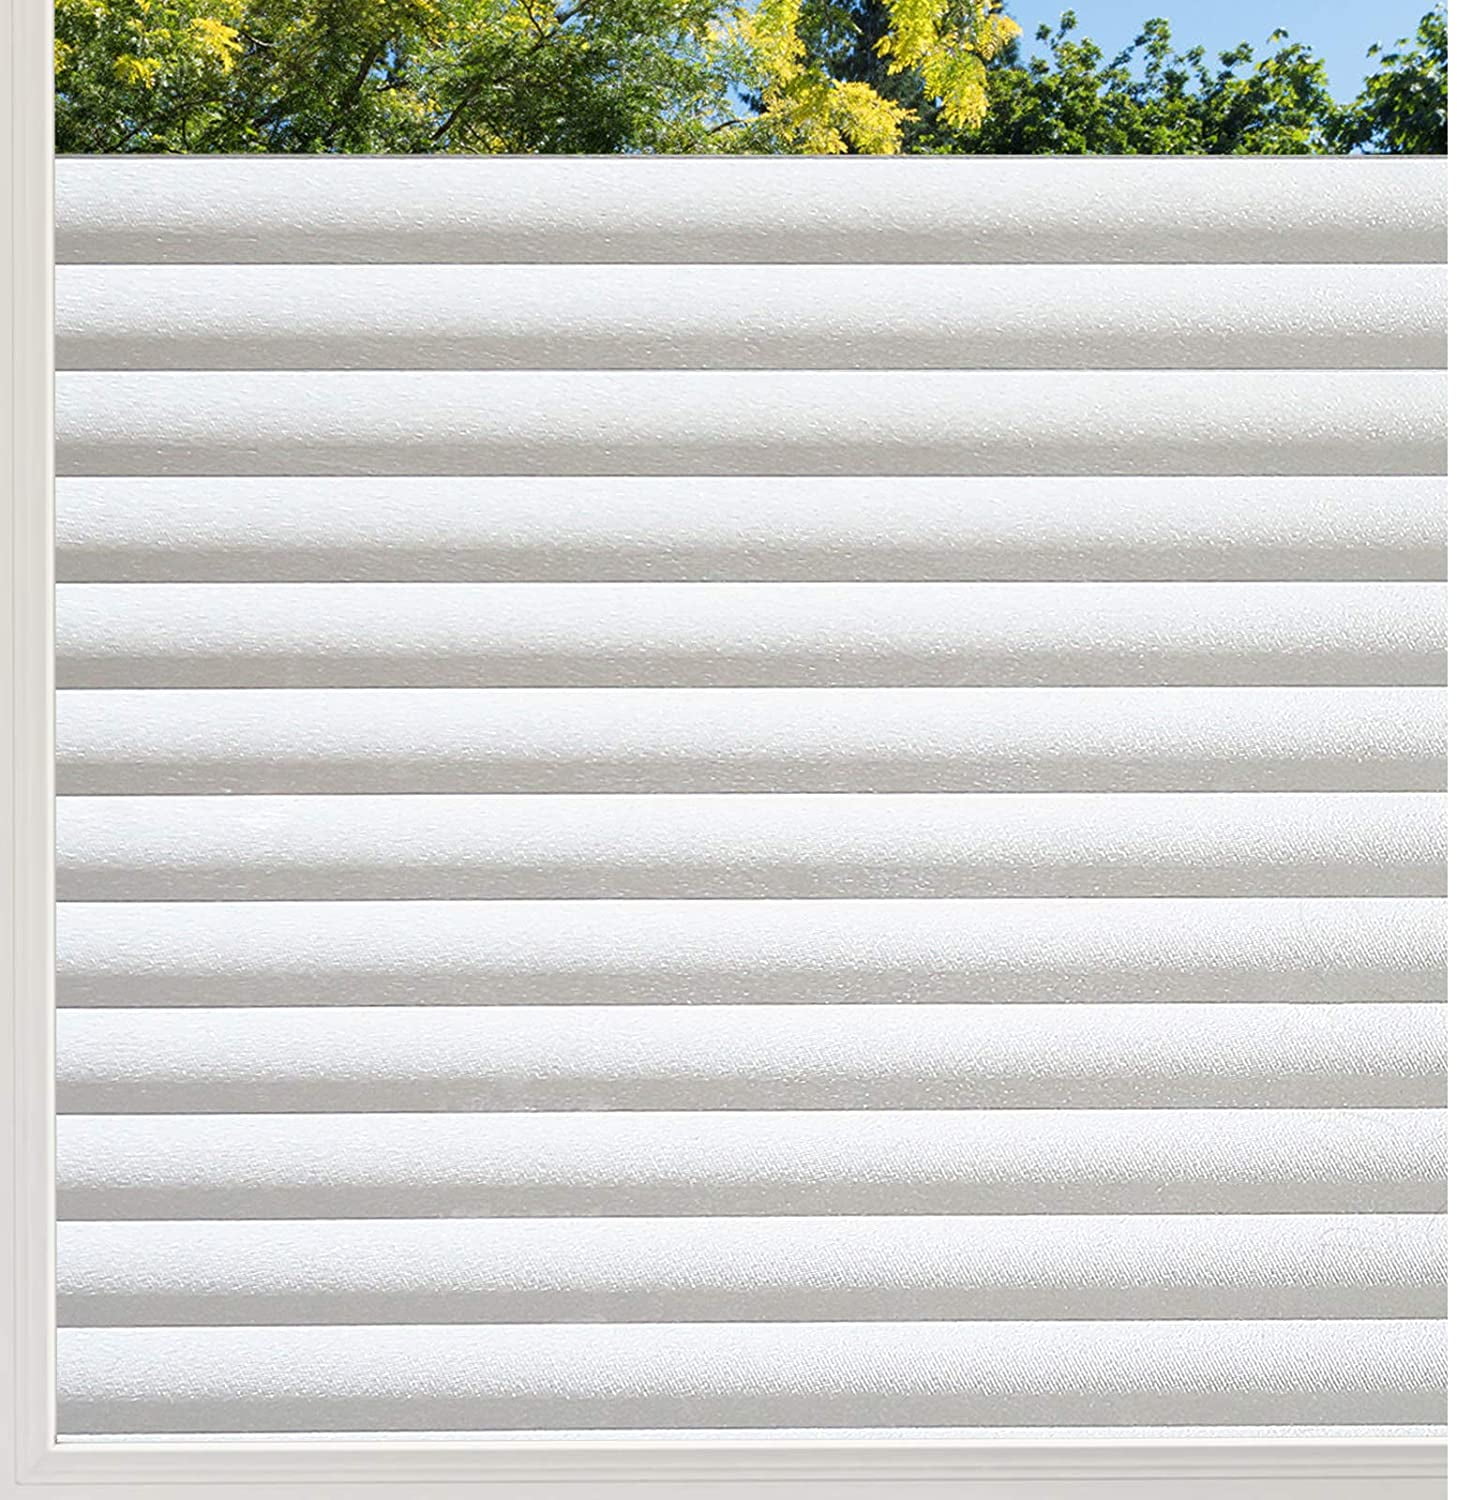 Frosted Window Glass Film Opaque Door Window Covering Non-Adhesive Static Cling Vinyl Window Sticker for Home Bathroom Office 35.4 x 78.7 Funfox Window Film Privacy